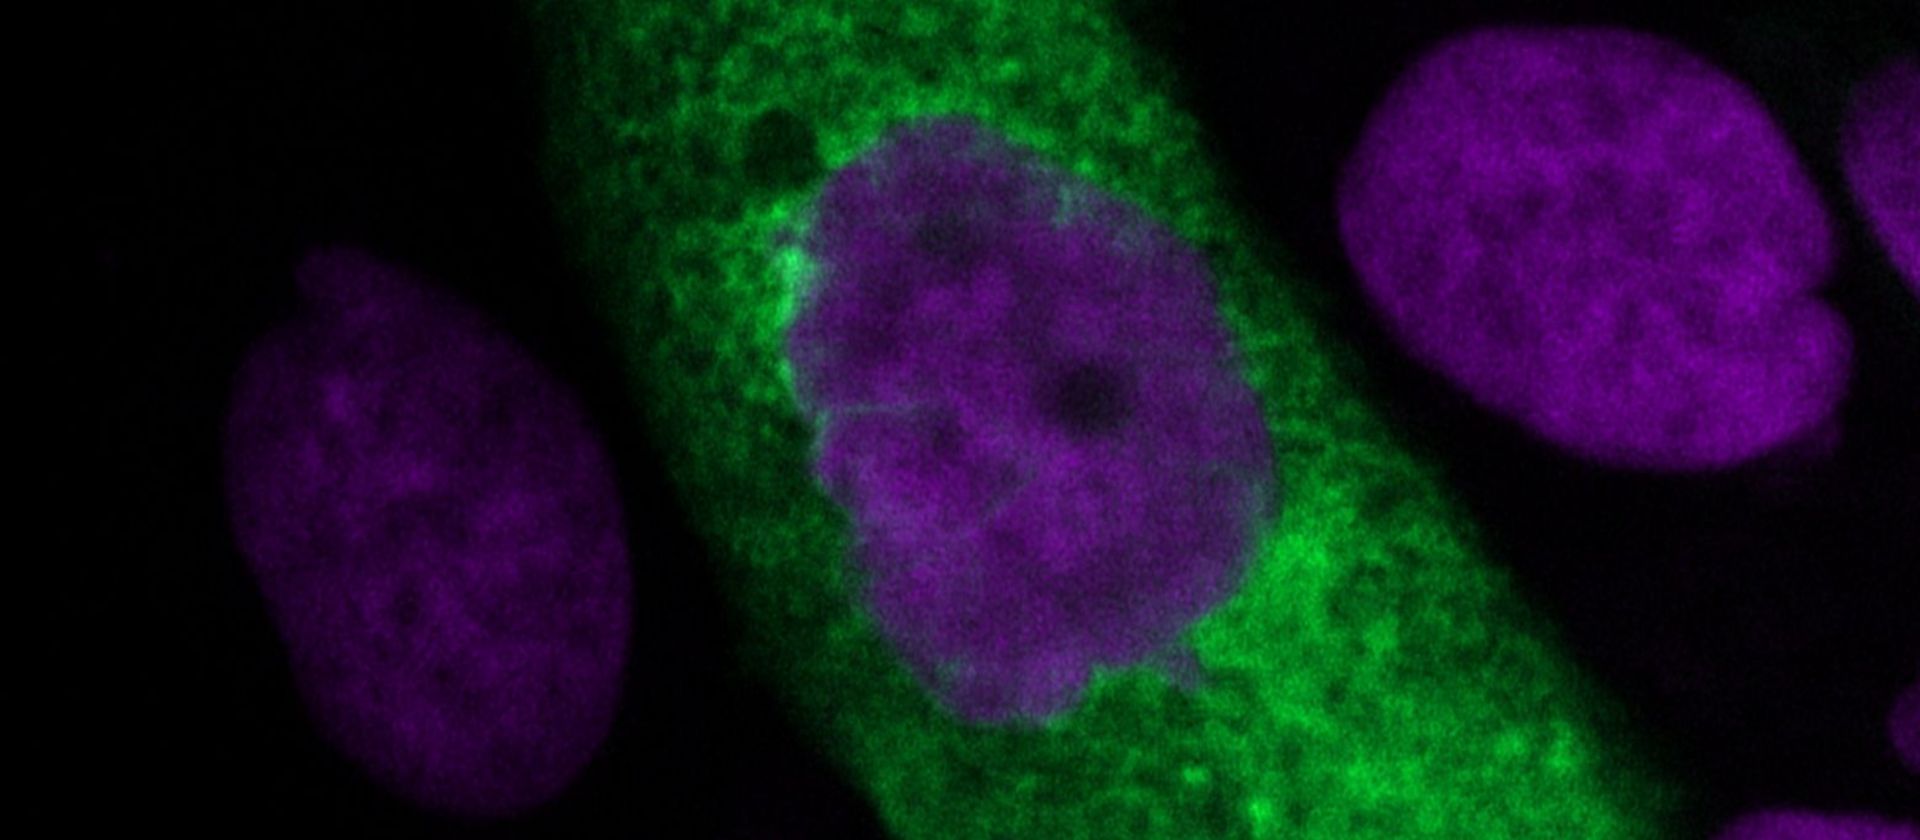 Lung cell infected with SARS-CoV-2 forms new virus particles (green) in its cytoplasm (violet: cell nuclei). ©HZI/Ulfert Rand